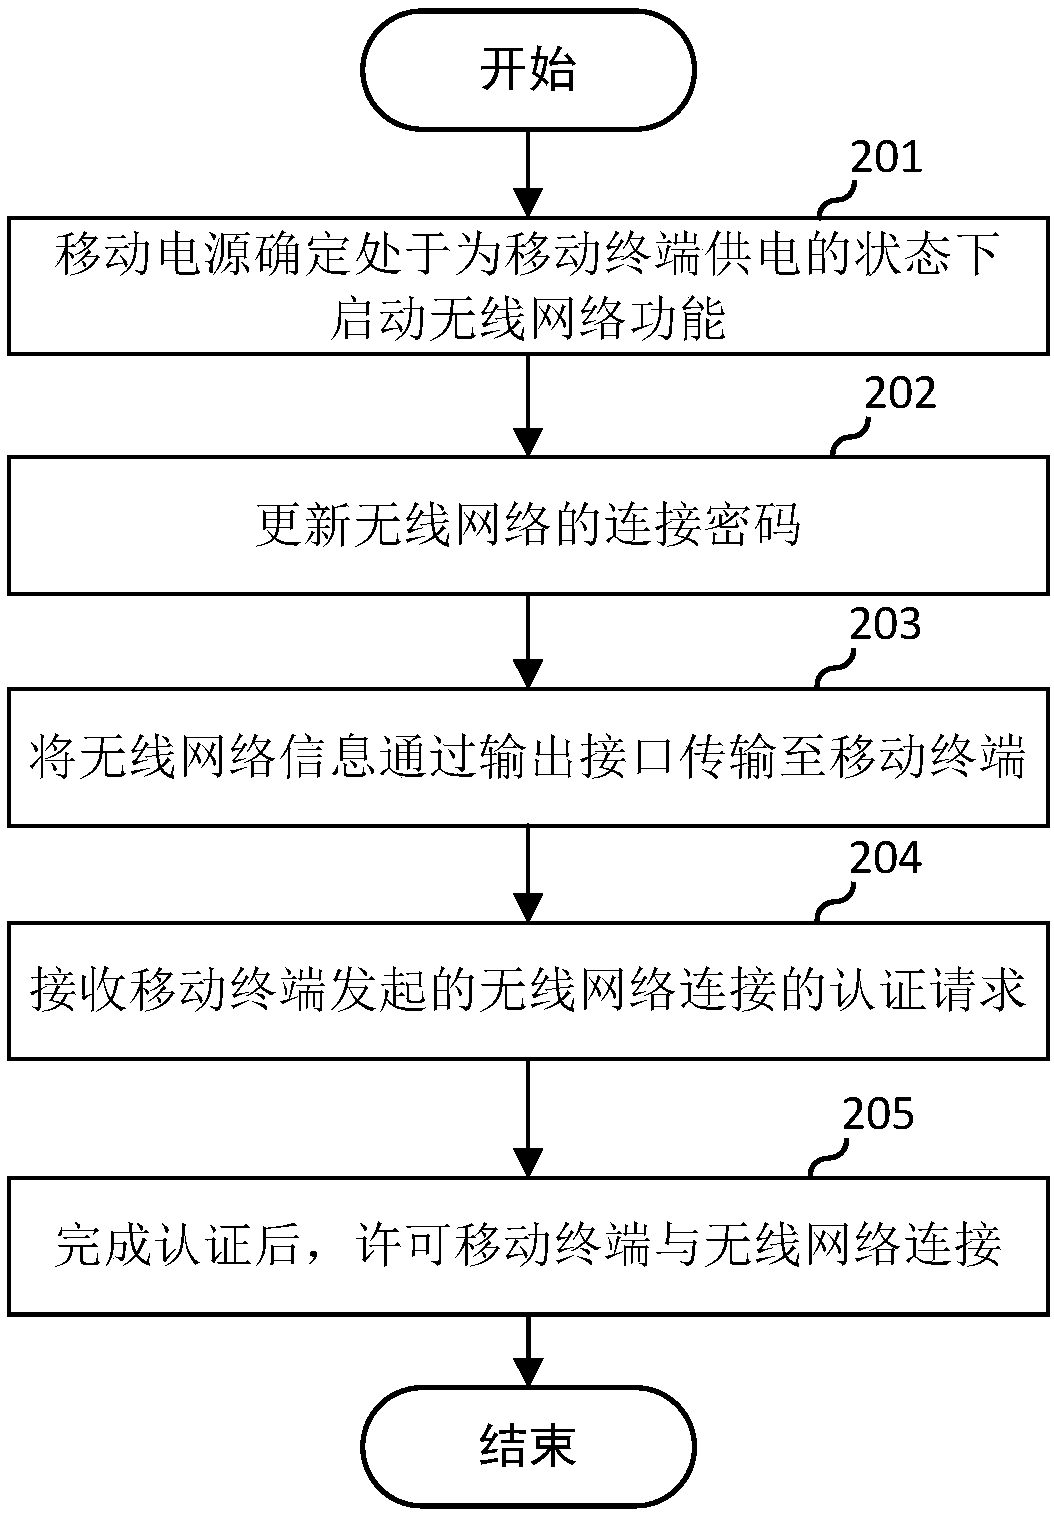 Wireless network access method and portable power source